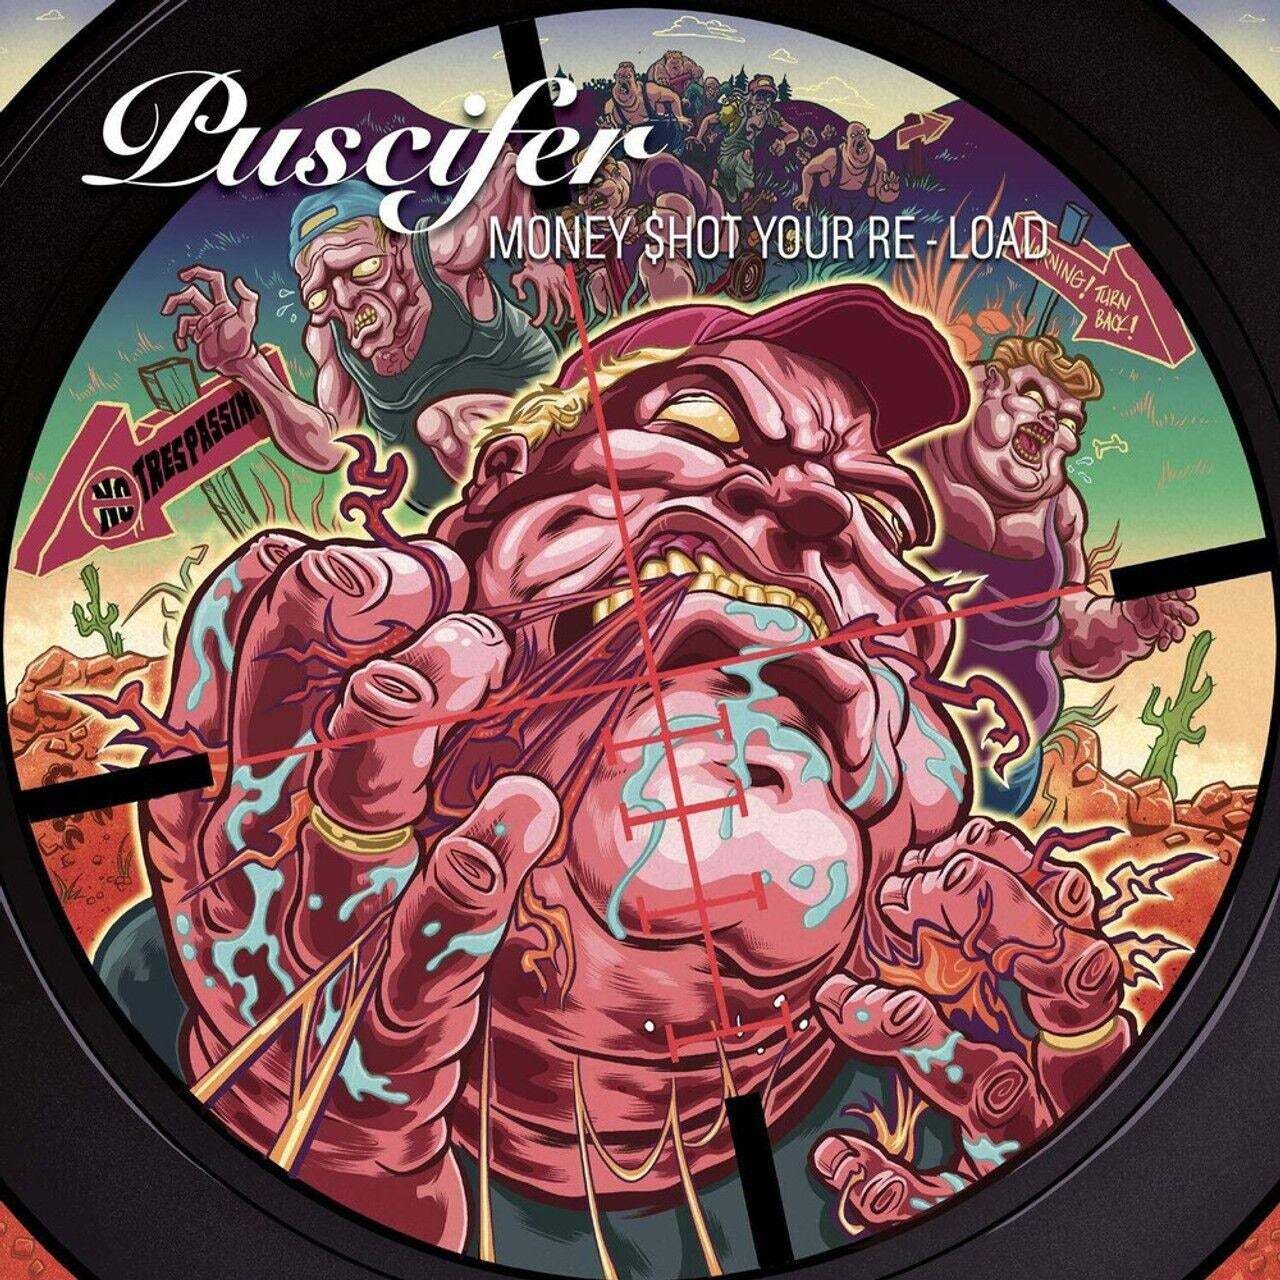 Puscifer / Money $hot Your Re-load